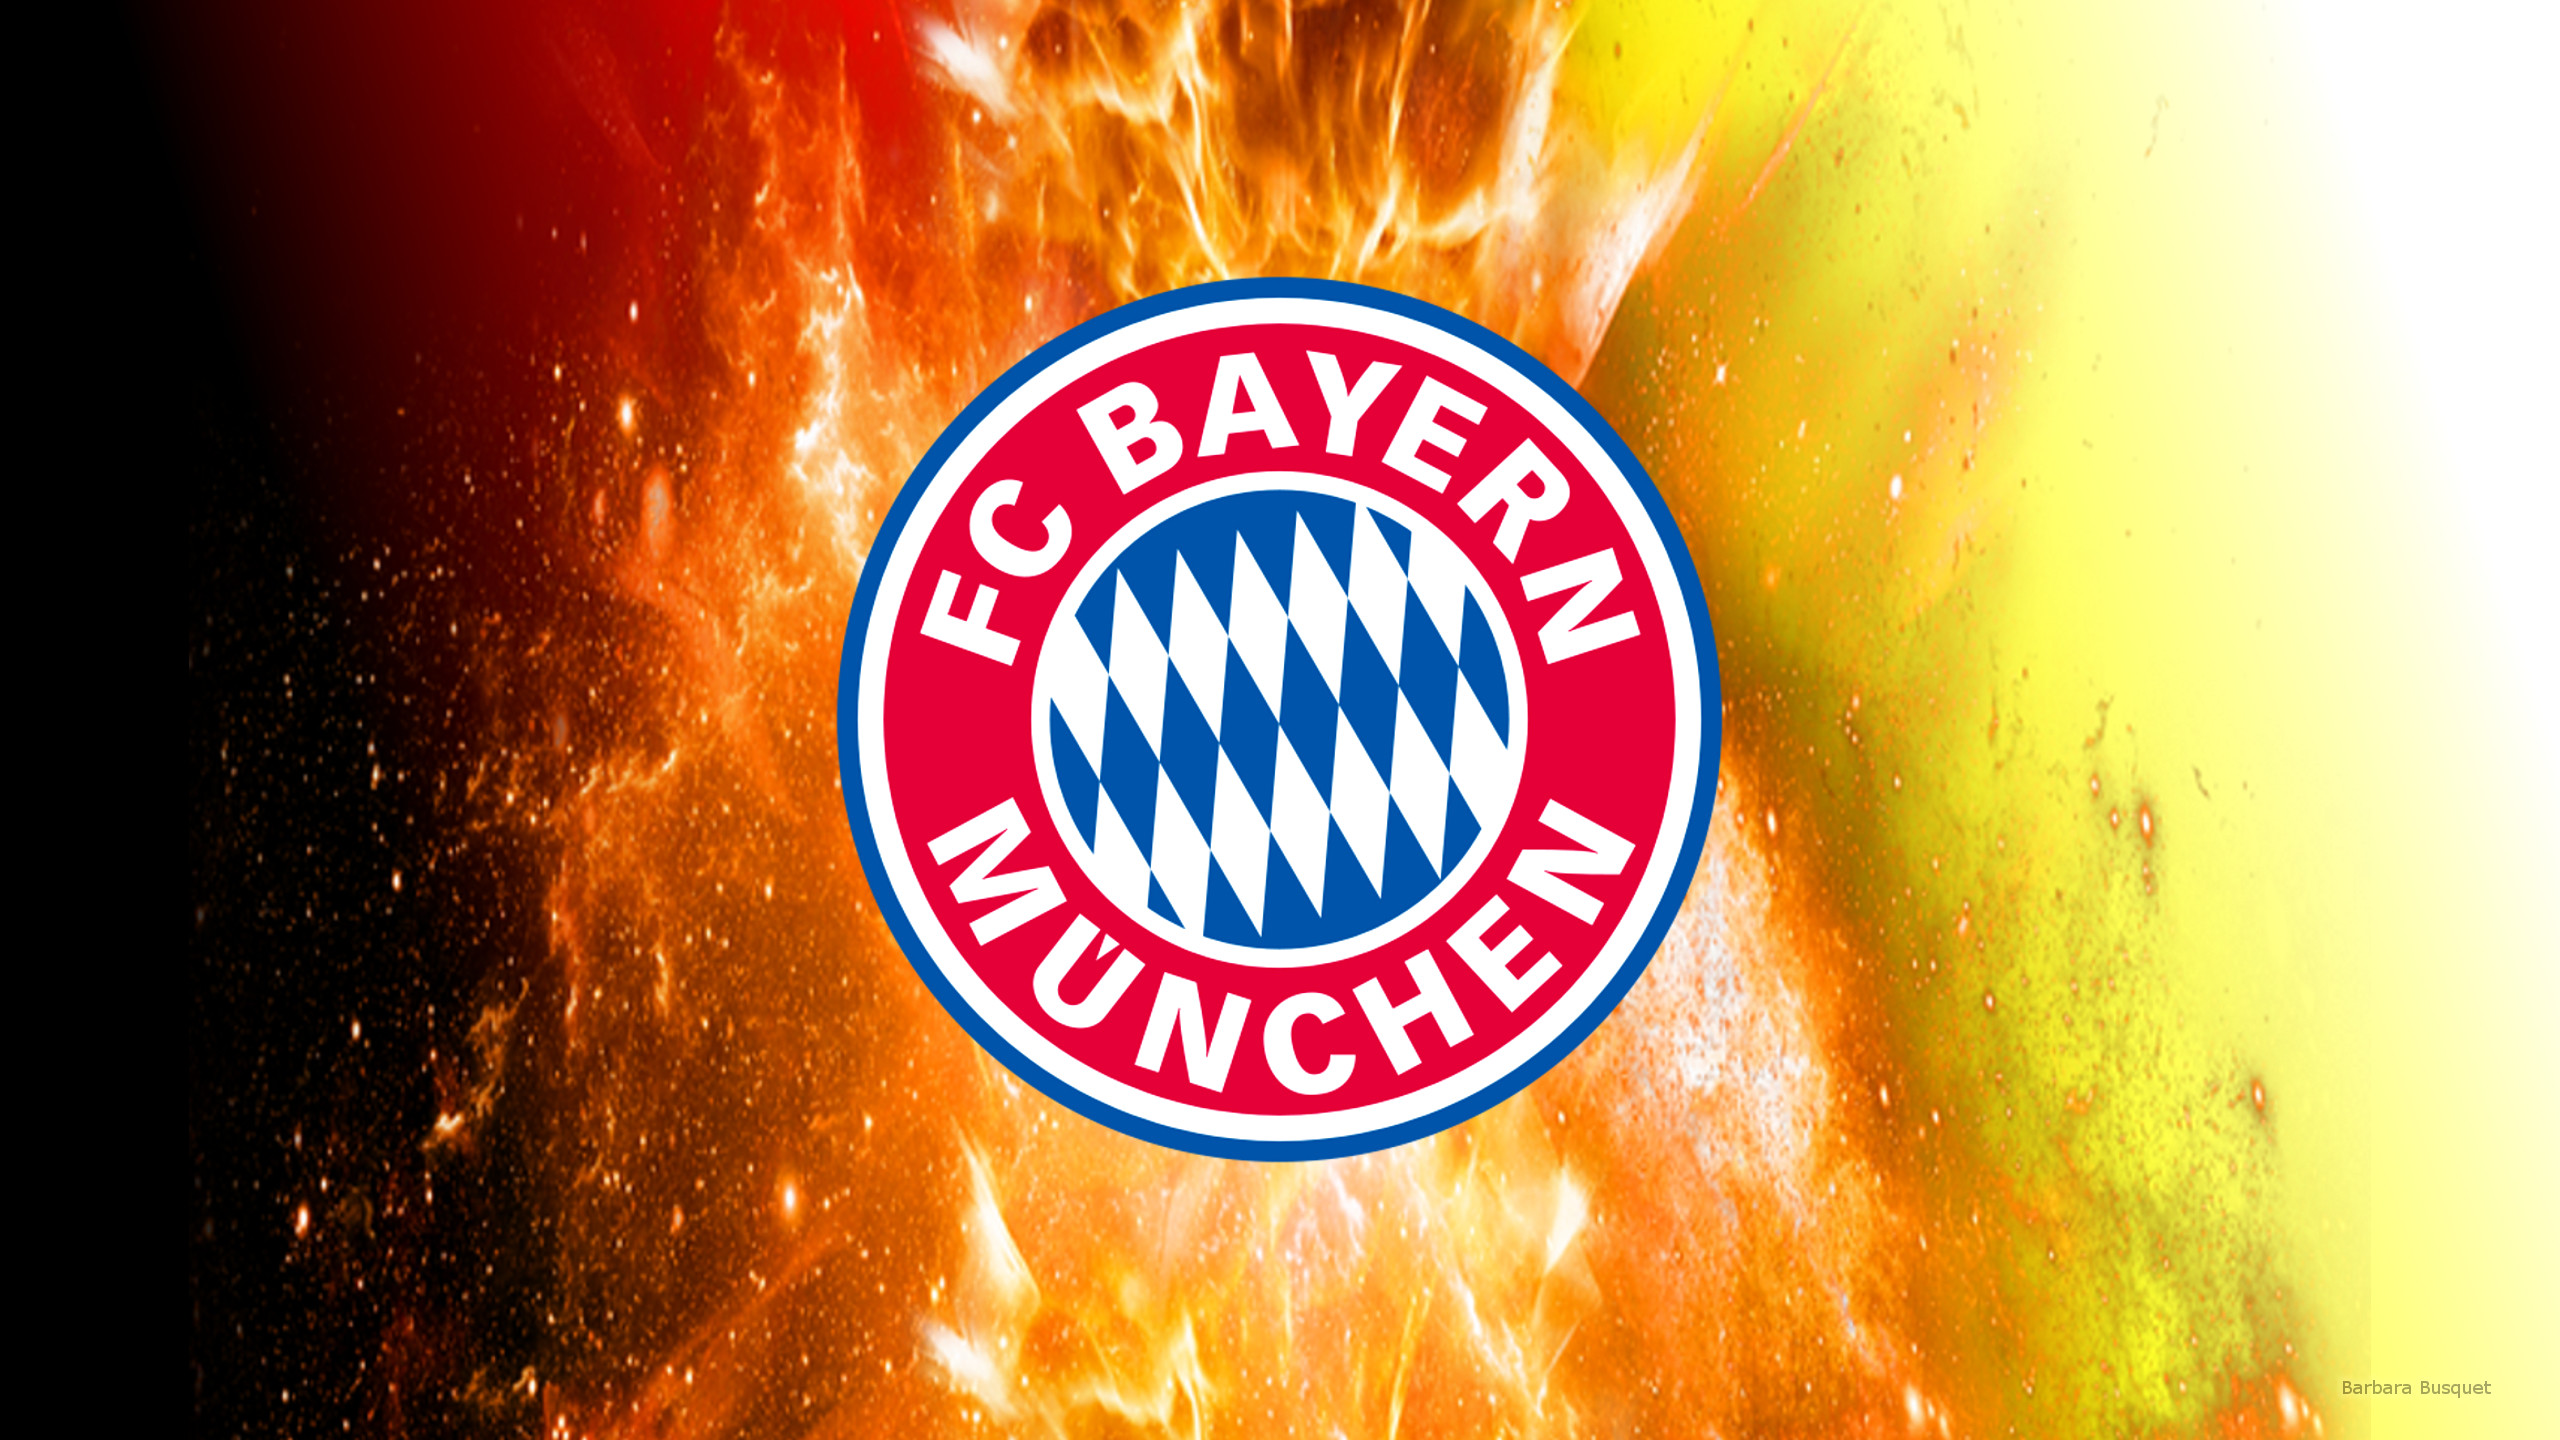 Bayern Munich With Fire 3040087 Hd Wallpaper Backgrounds Download